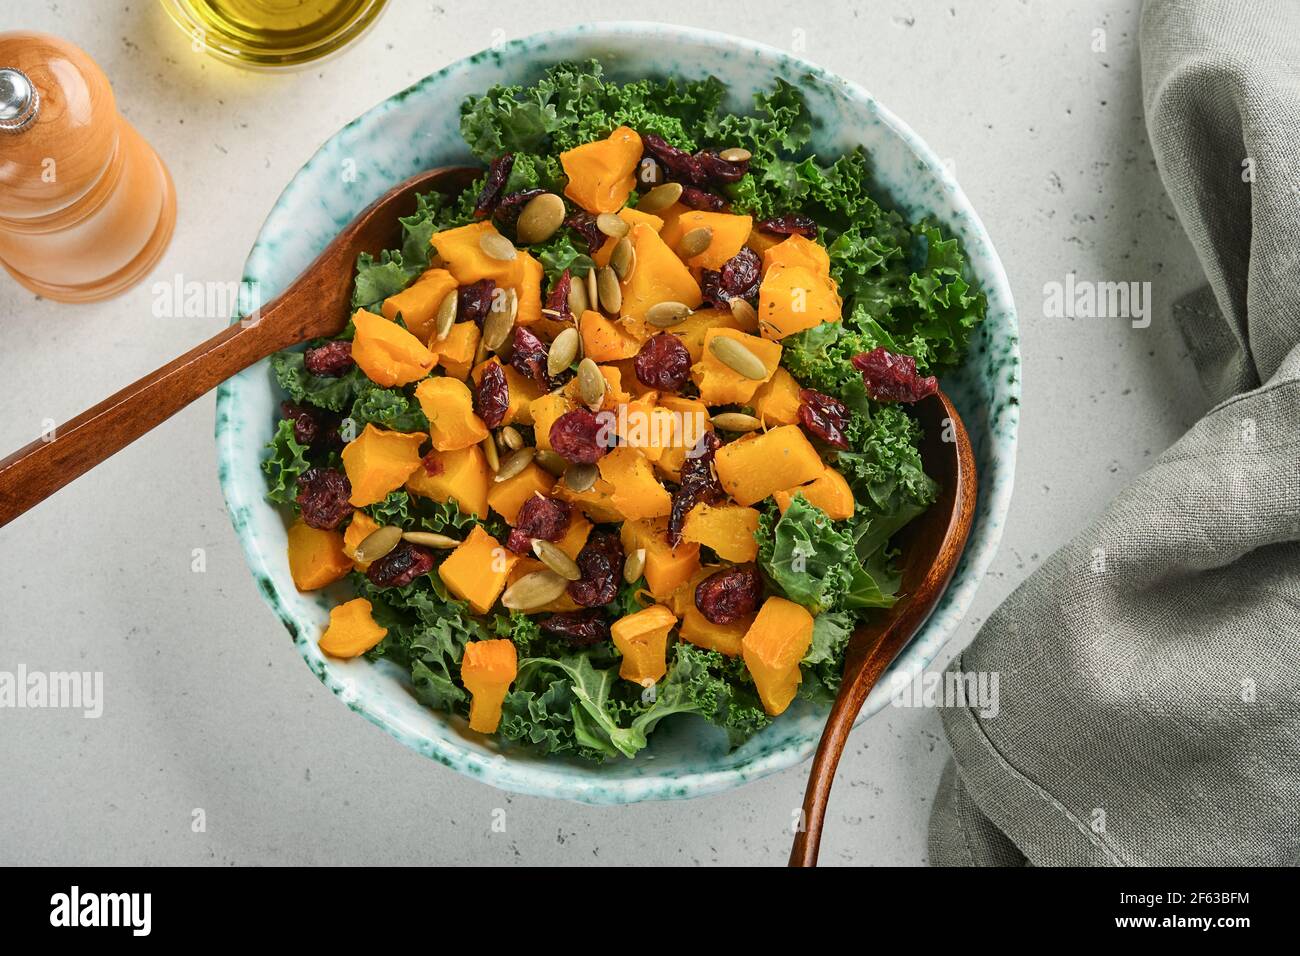 Fall salad with kale, roasted pumpkin, seeds and dried cranberries in bowl. Grey background. Mock up. Top view. Stock Photo